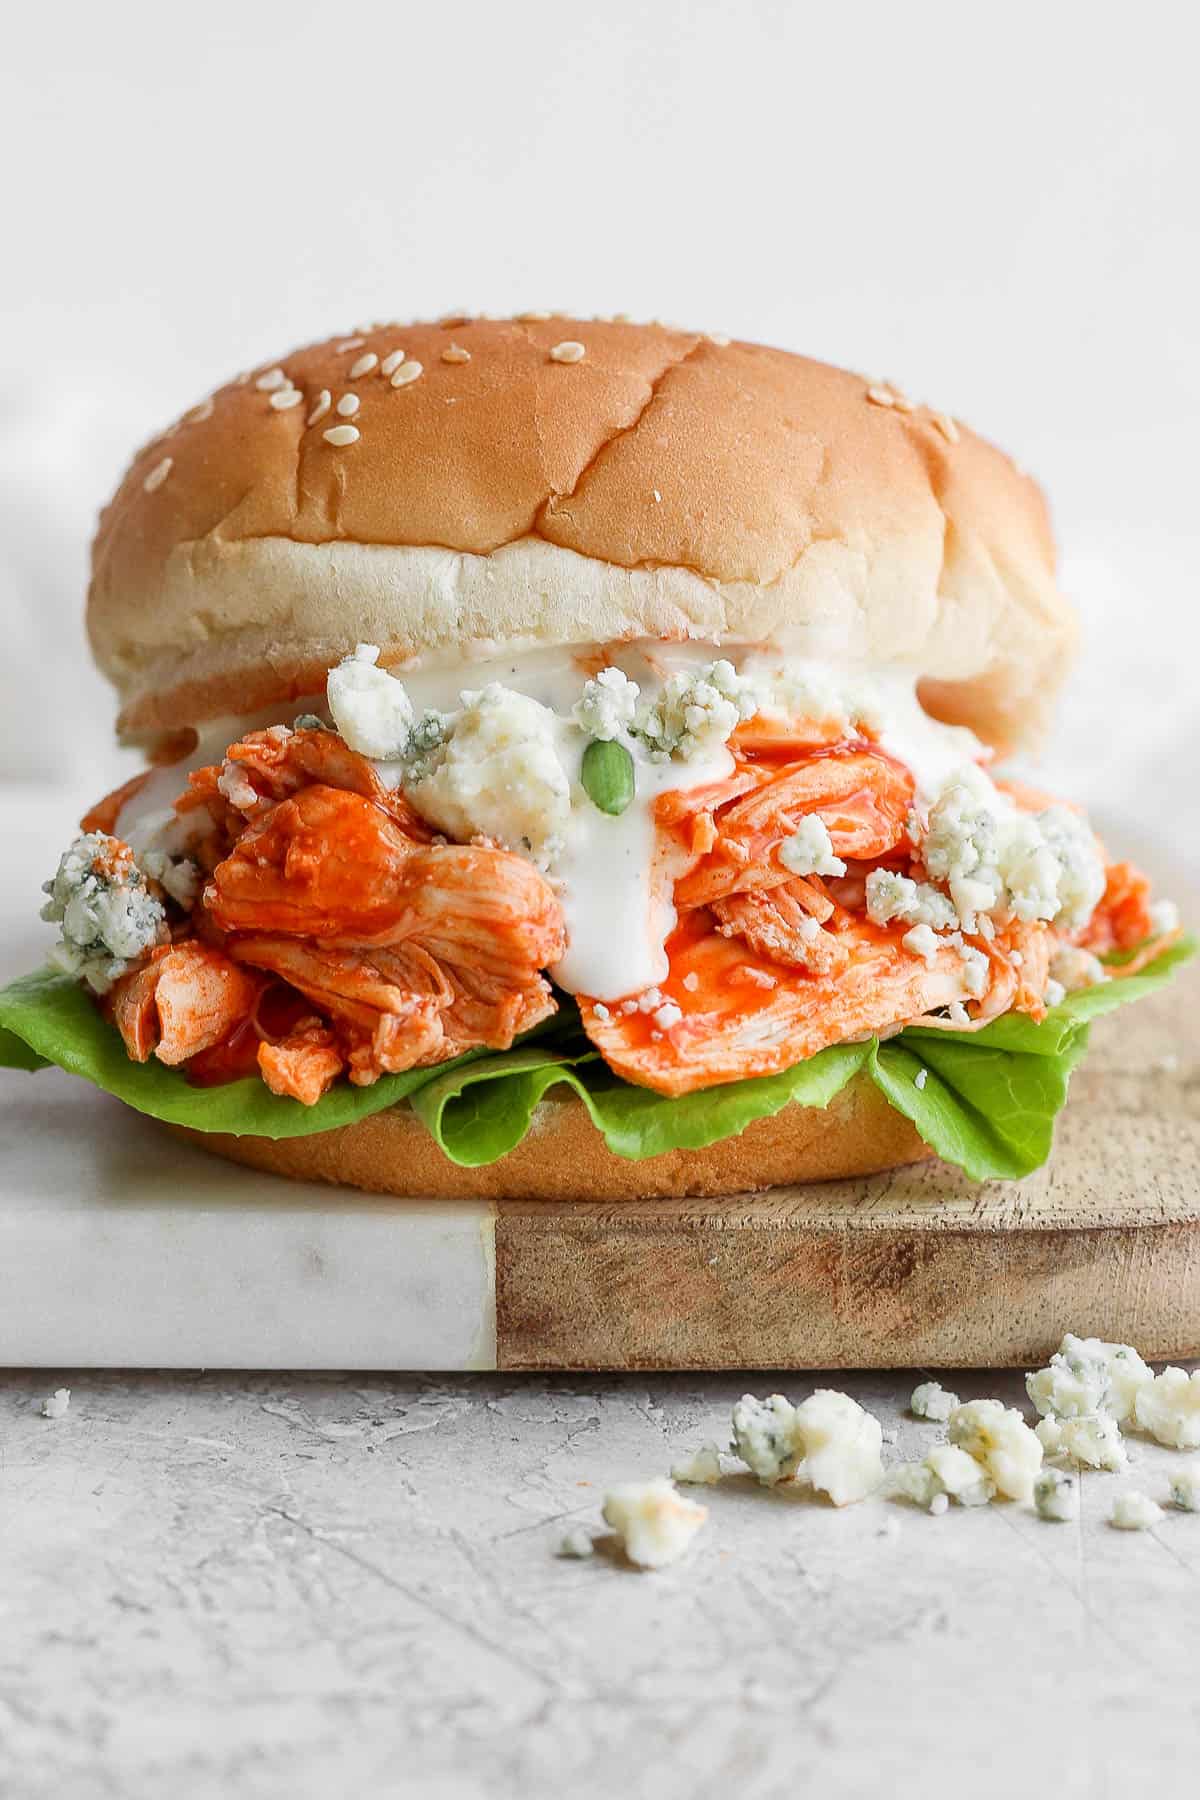 Buffalo chicken sandwich with all the toppings.